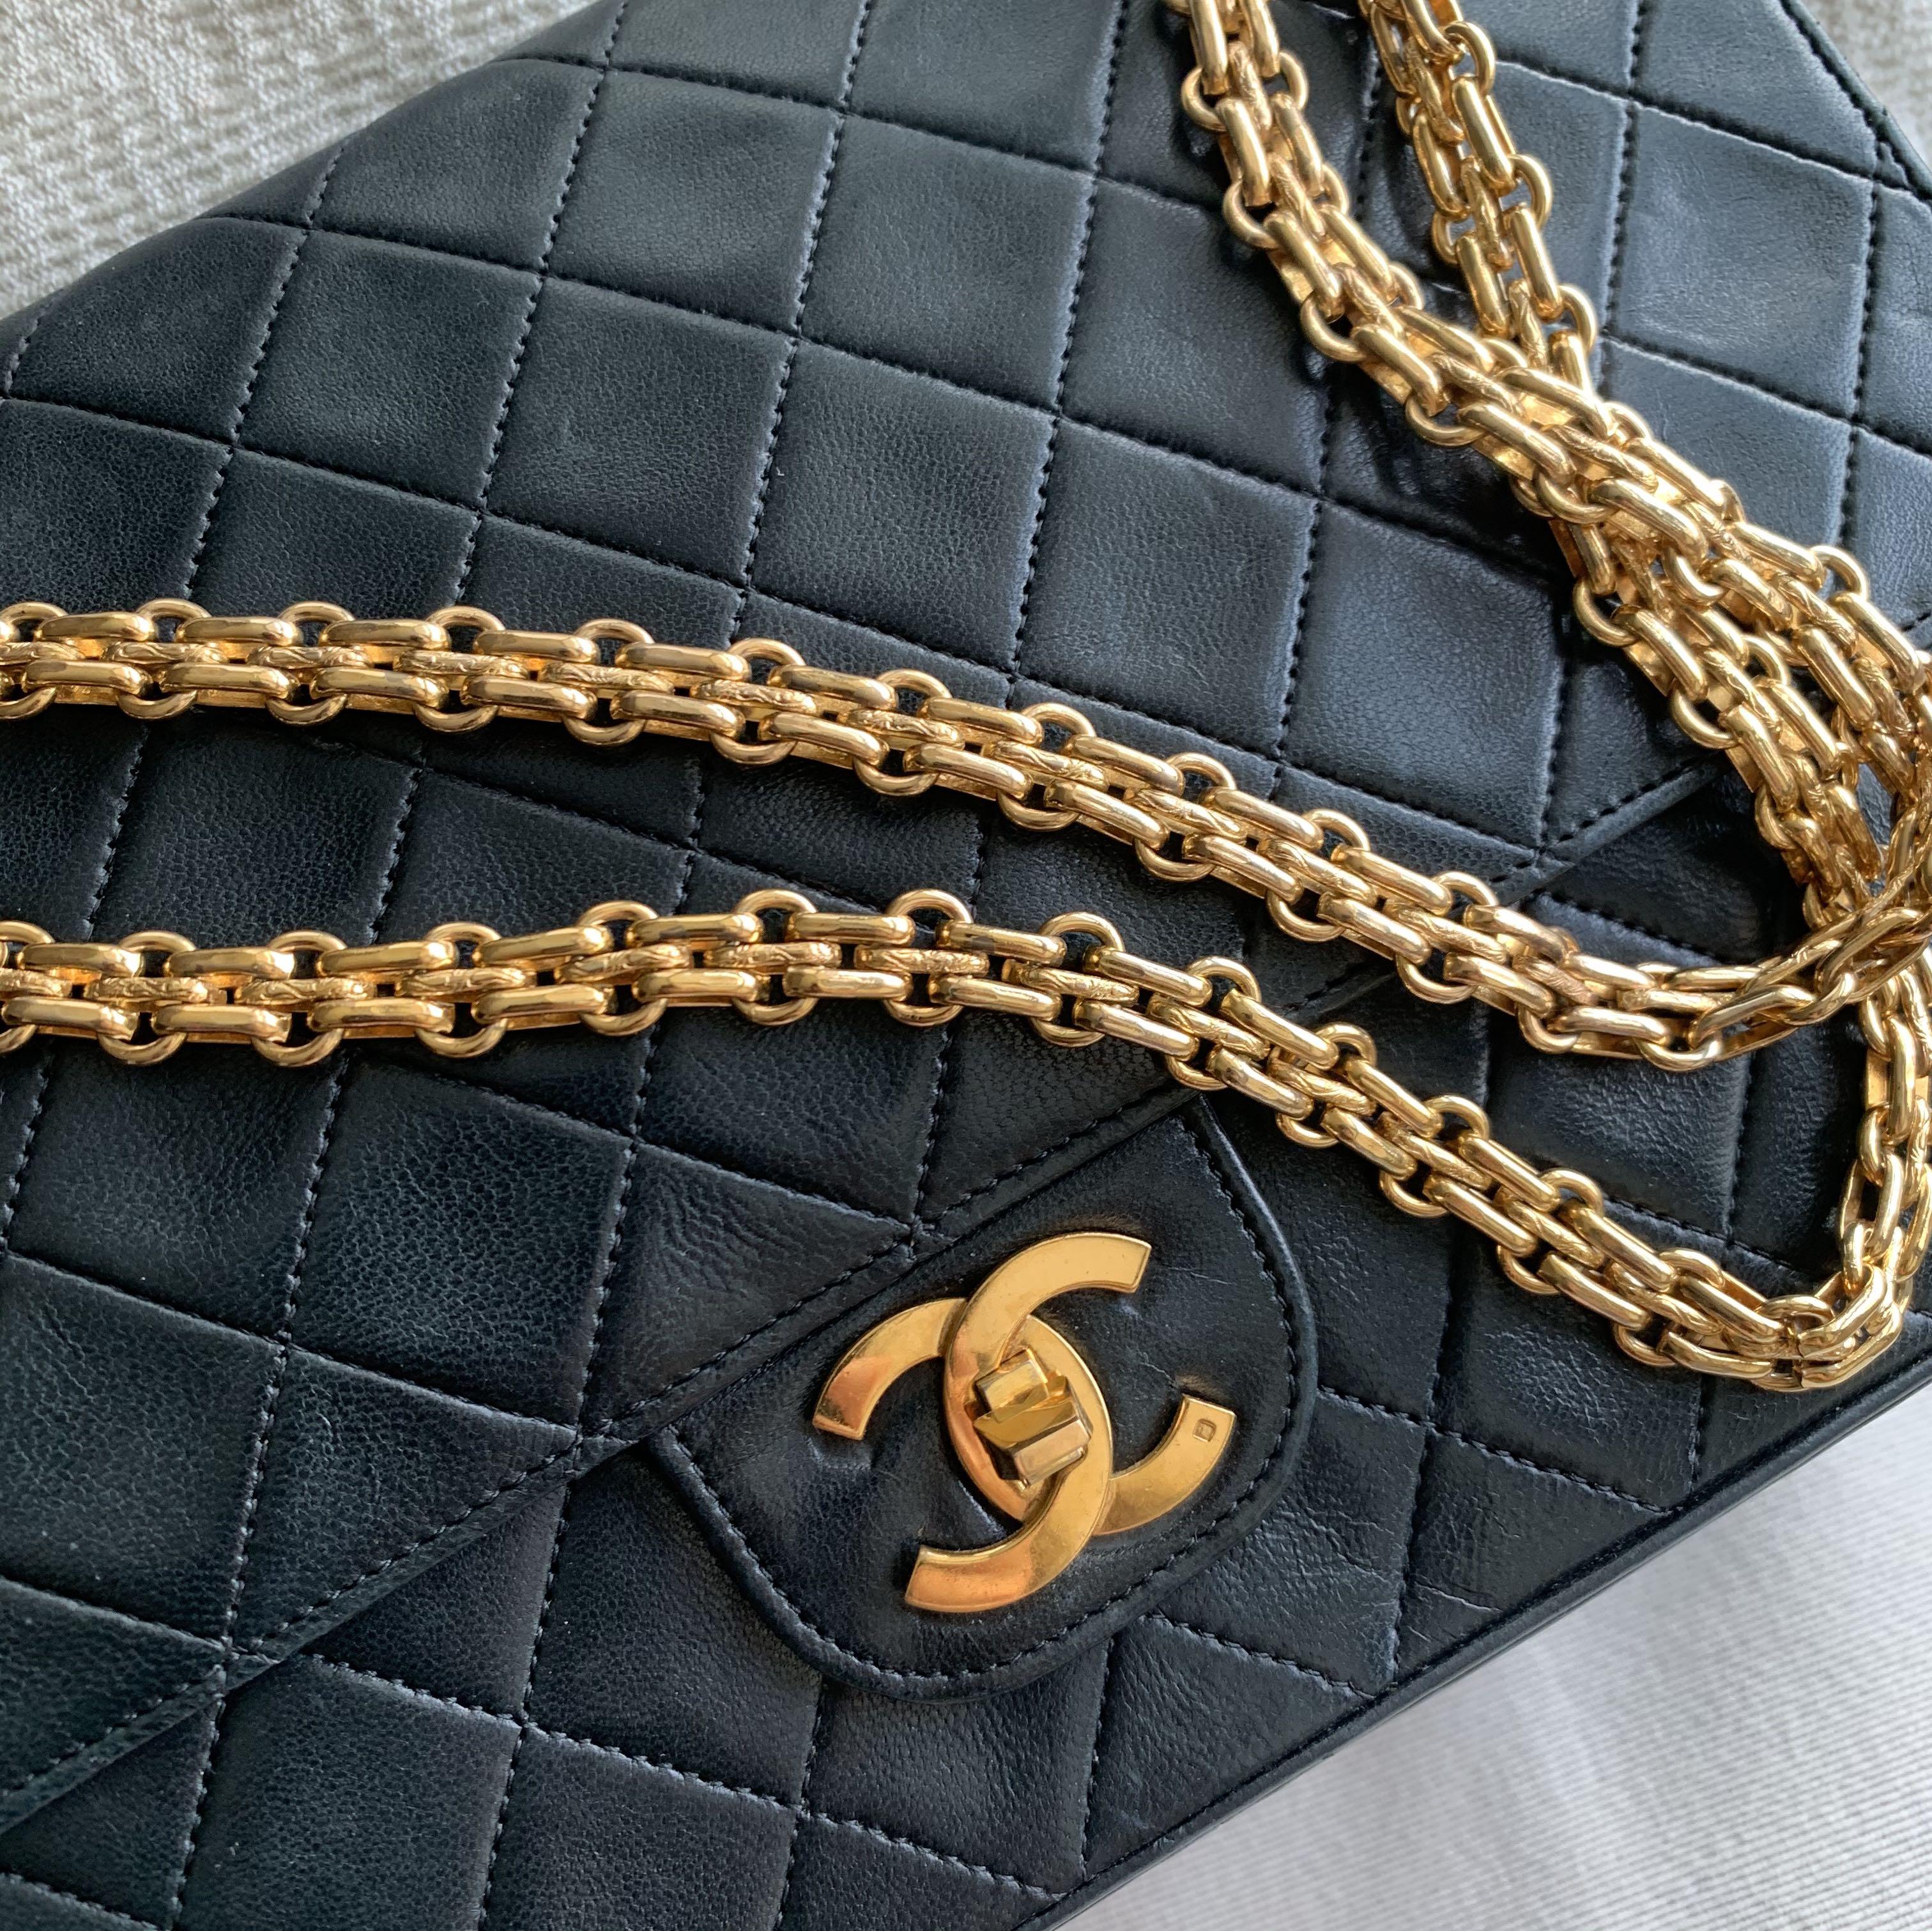 AUTHENTIC CHANEL 10.5" Classic Flap Bag with Mademoiselle Reissue Chain